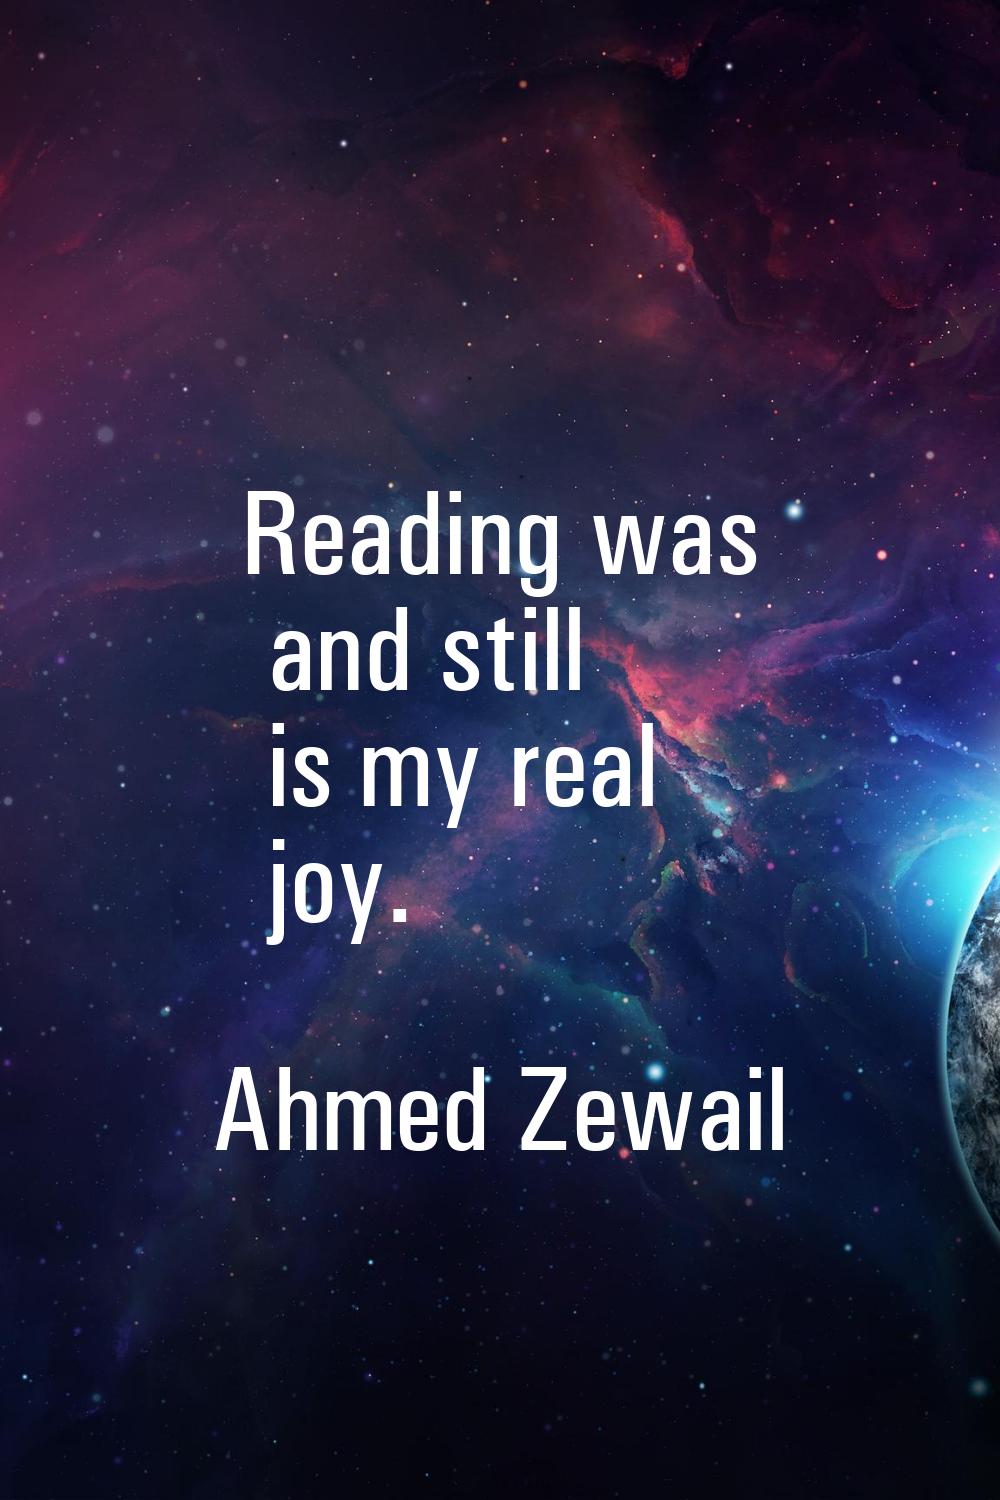 Reading was and still is my real joy.